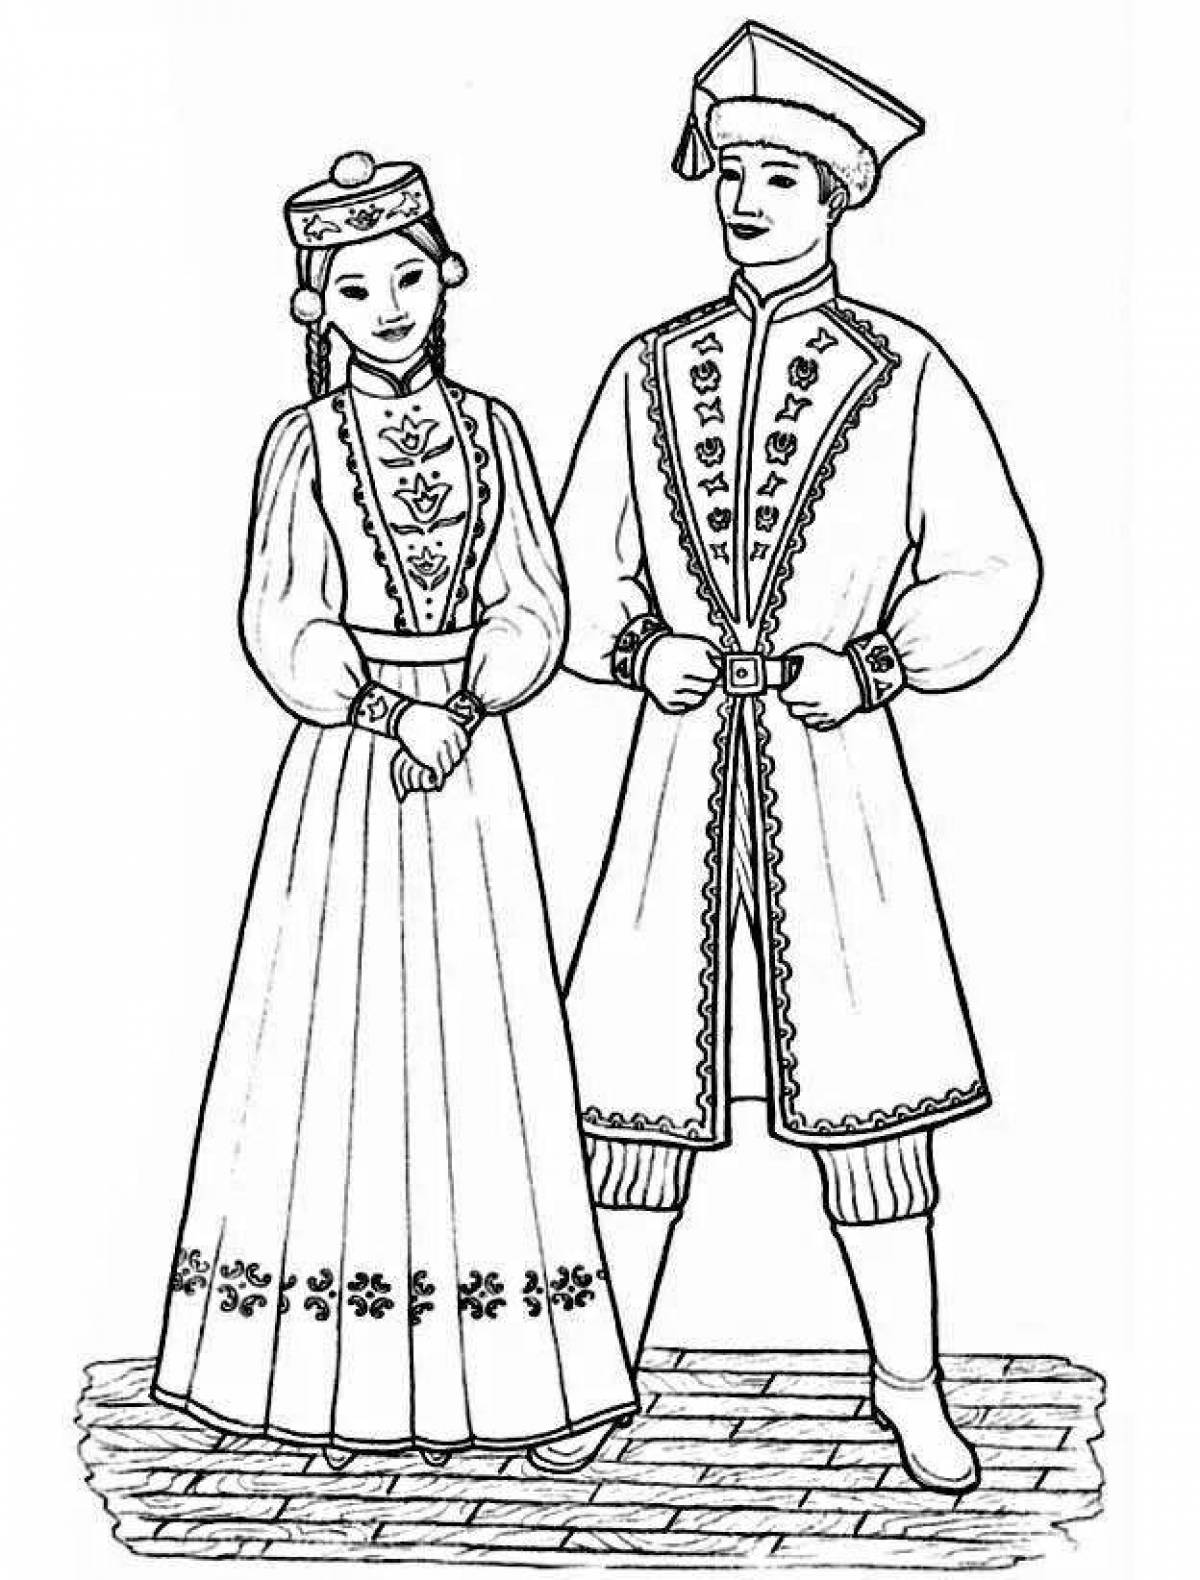 Coloring page glorious folk costume